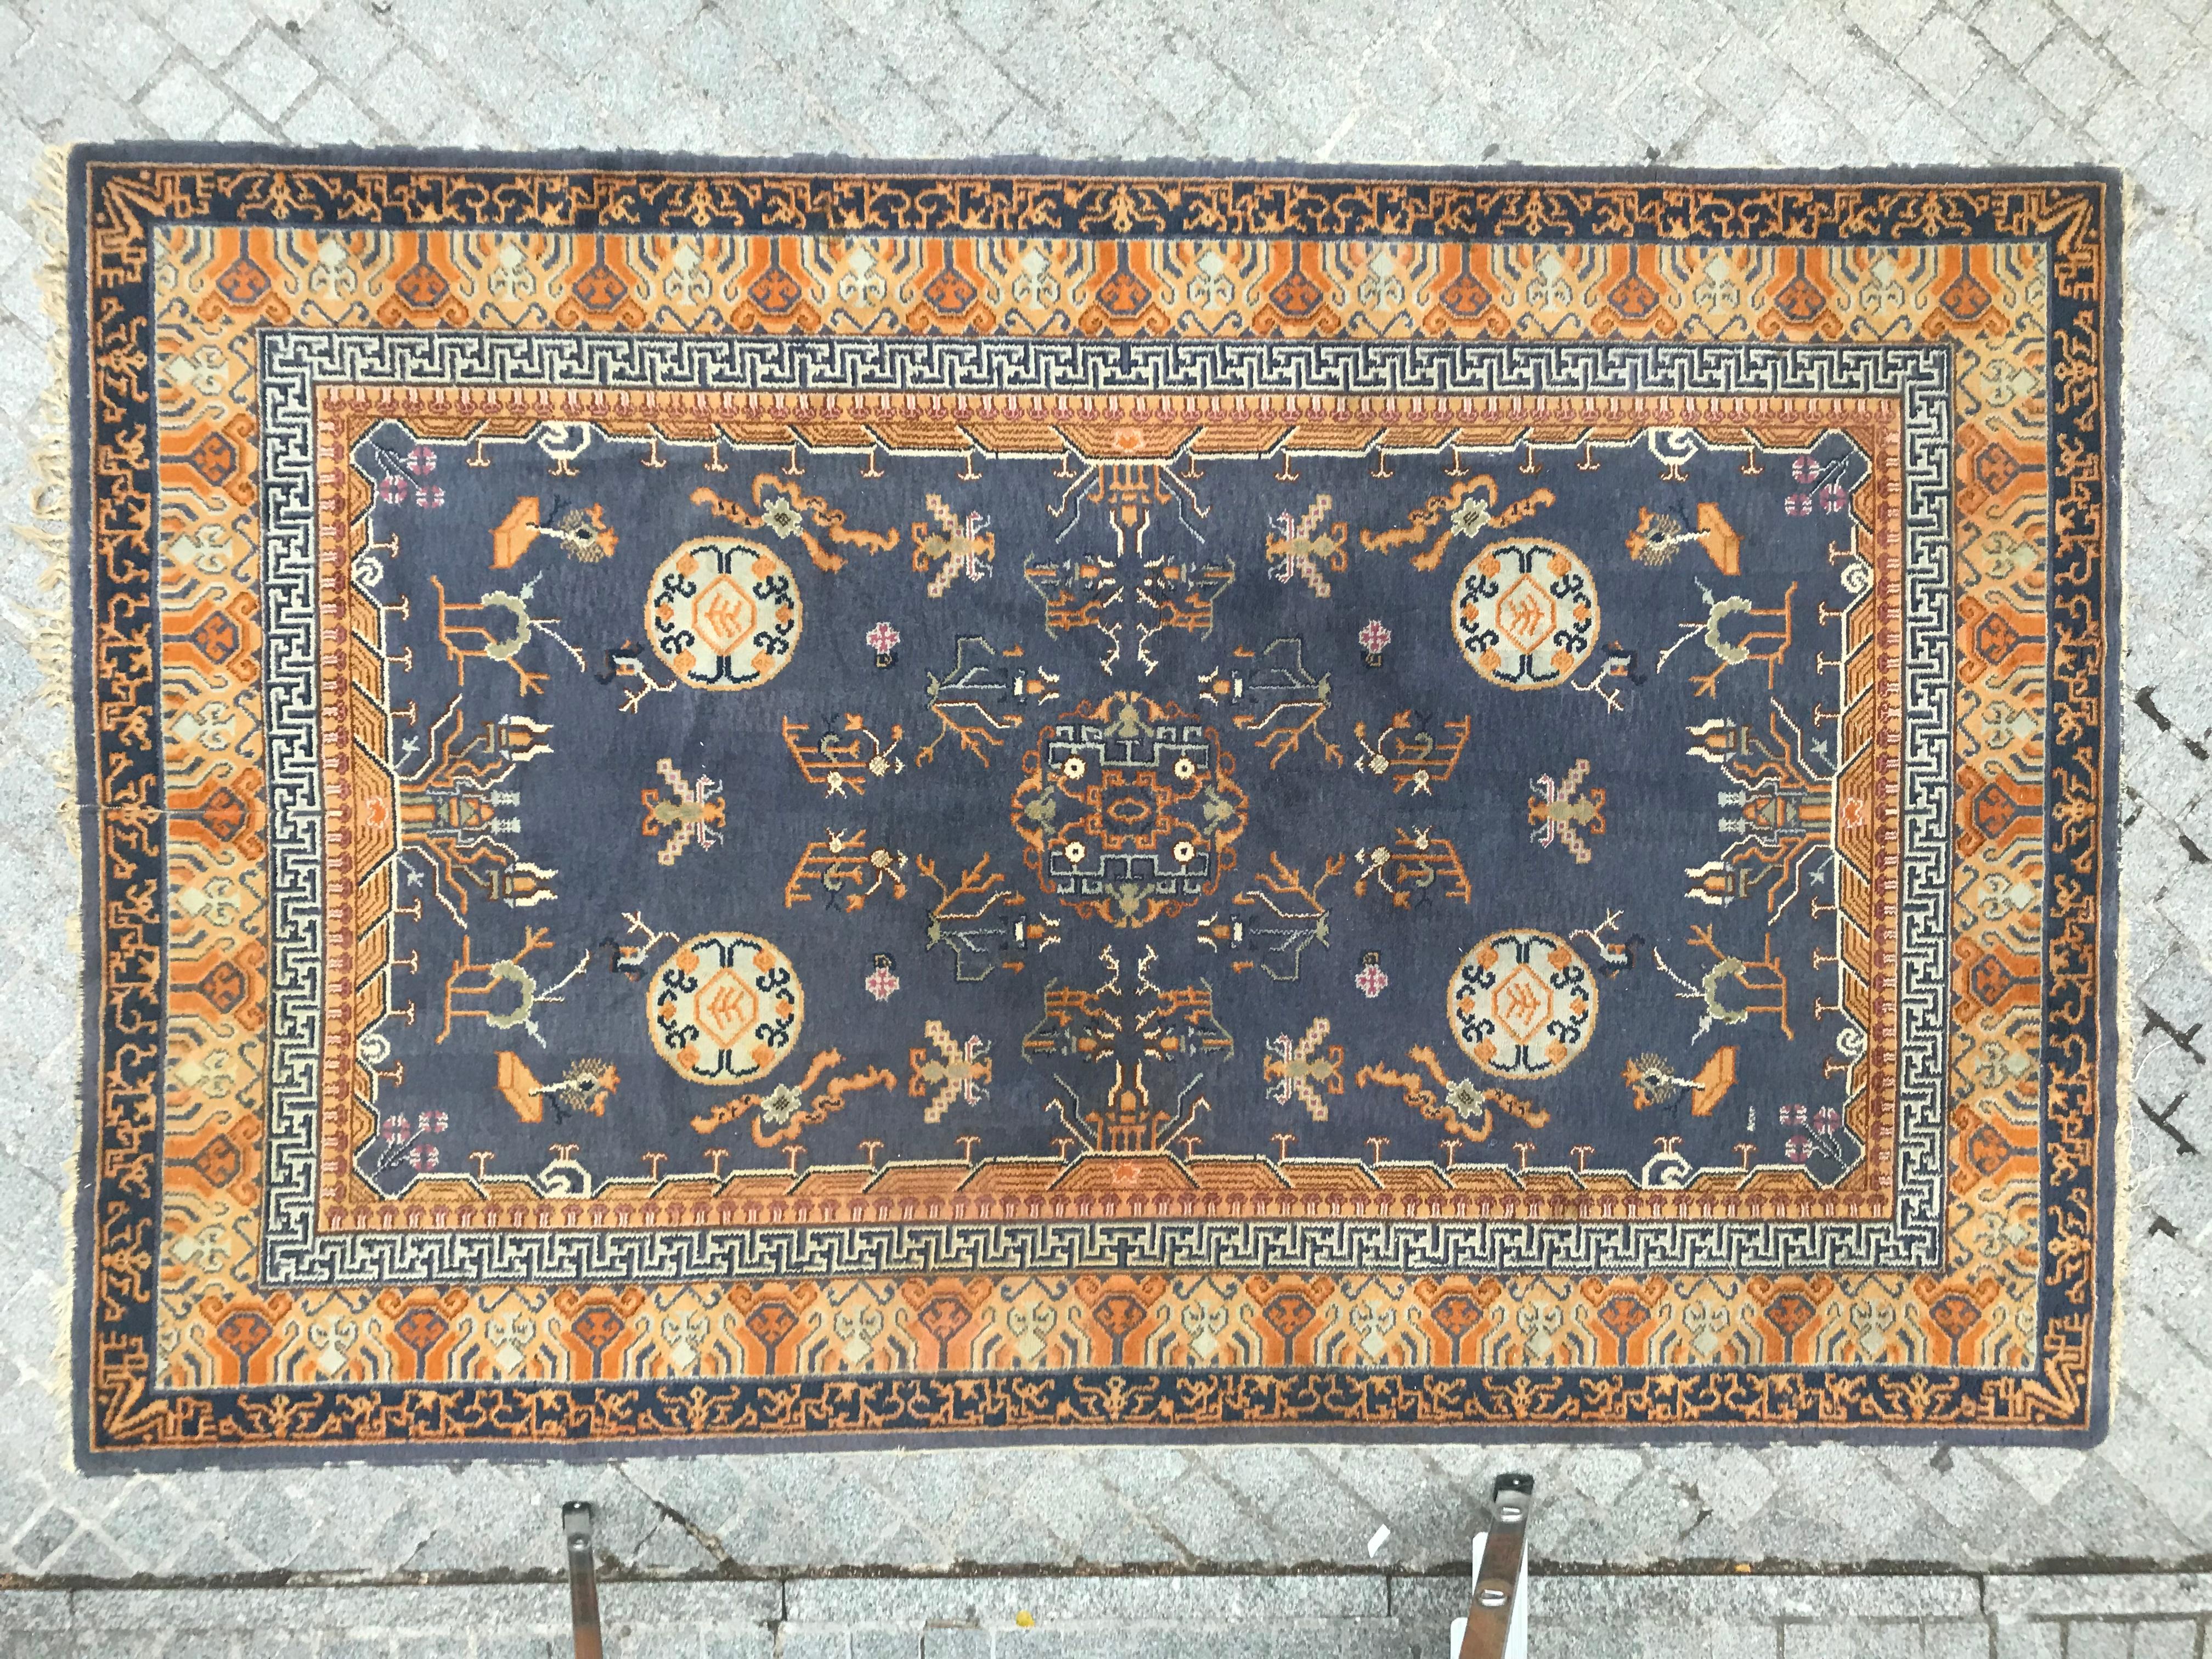 Exquisite French Knotted Rug with Stunning Chinese Design!

This beautiful French knotted rug features an intricate Chinese design with a captivating color palette of blue and yellow. It's entirely handcrafted with wool velvet on a soft cotton